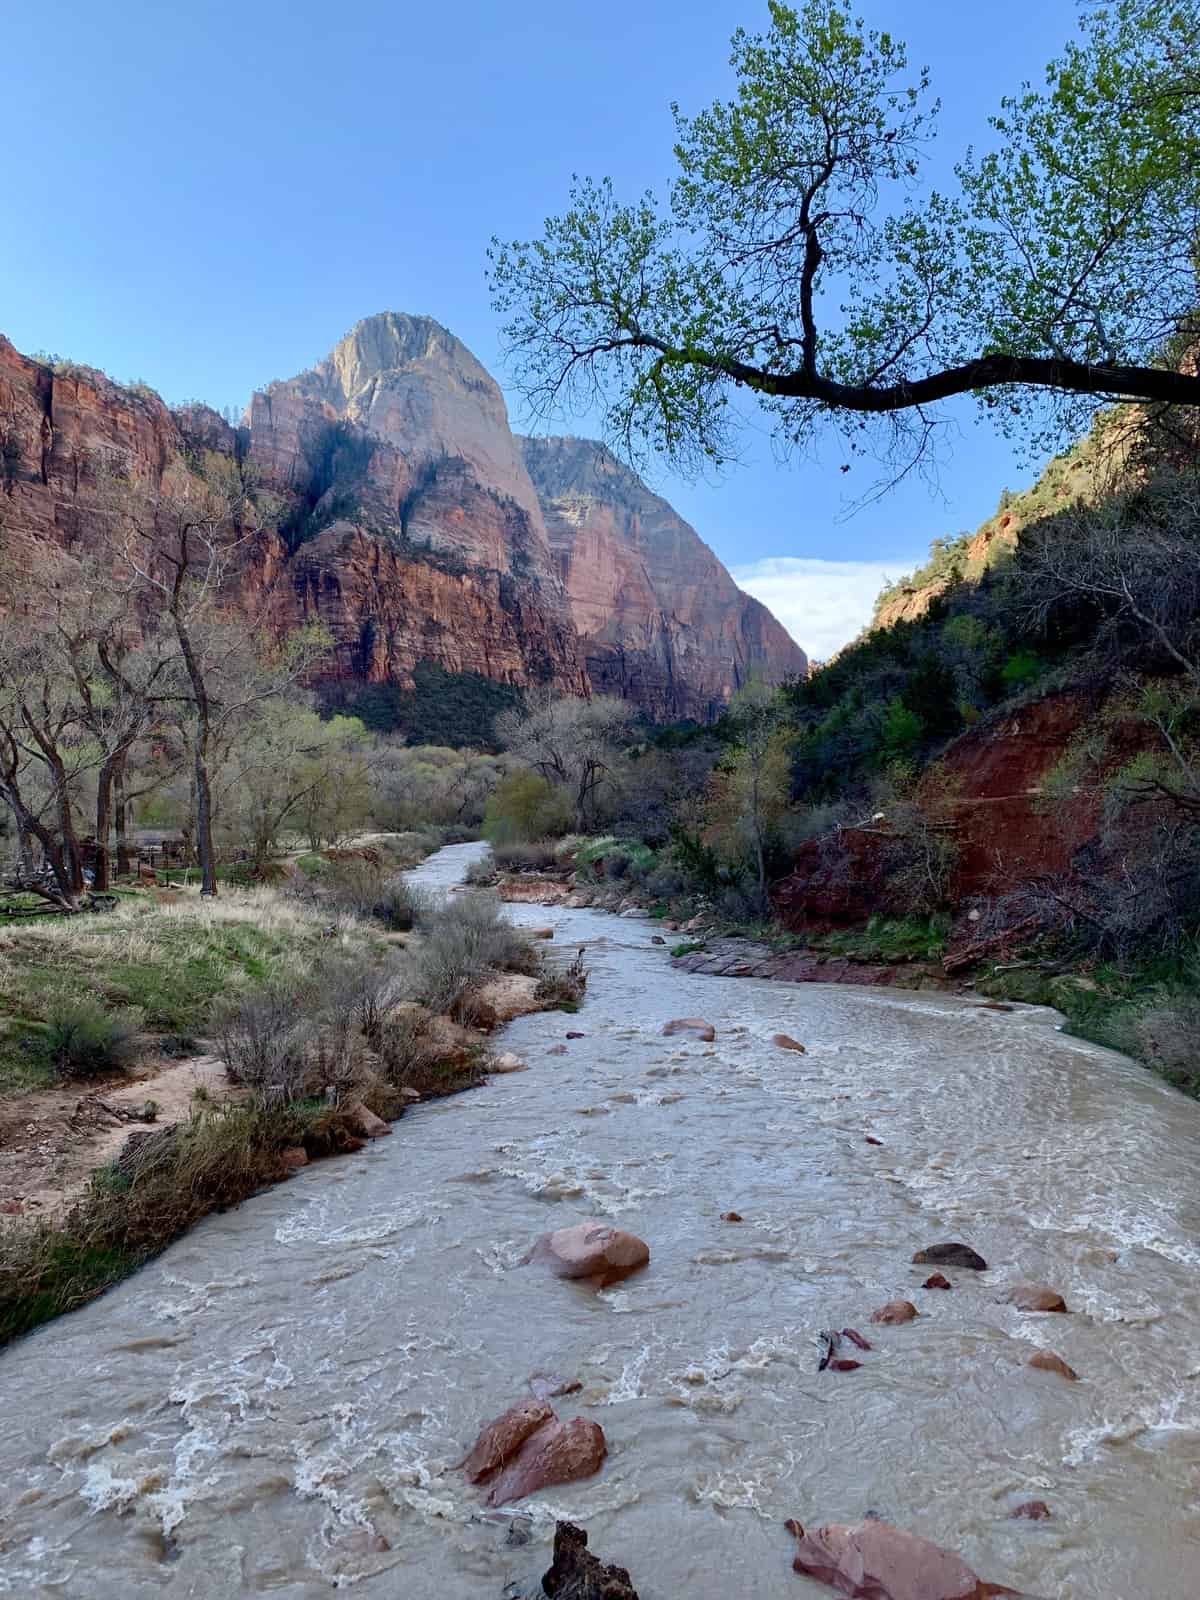 How To Plan a Visit to Zion National Park During COVID | If you're wanting to visit Zion during COVID, it's important to plan ahead and know about the changes and restrictions. What you need to know about Zion shuttle tickets, shuttle stop closures, alternative ways to visit, and more! What to do in Zion. #nps #zion #covidrestrictions #traveltips #zionnationalpark